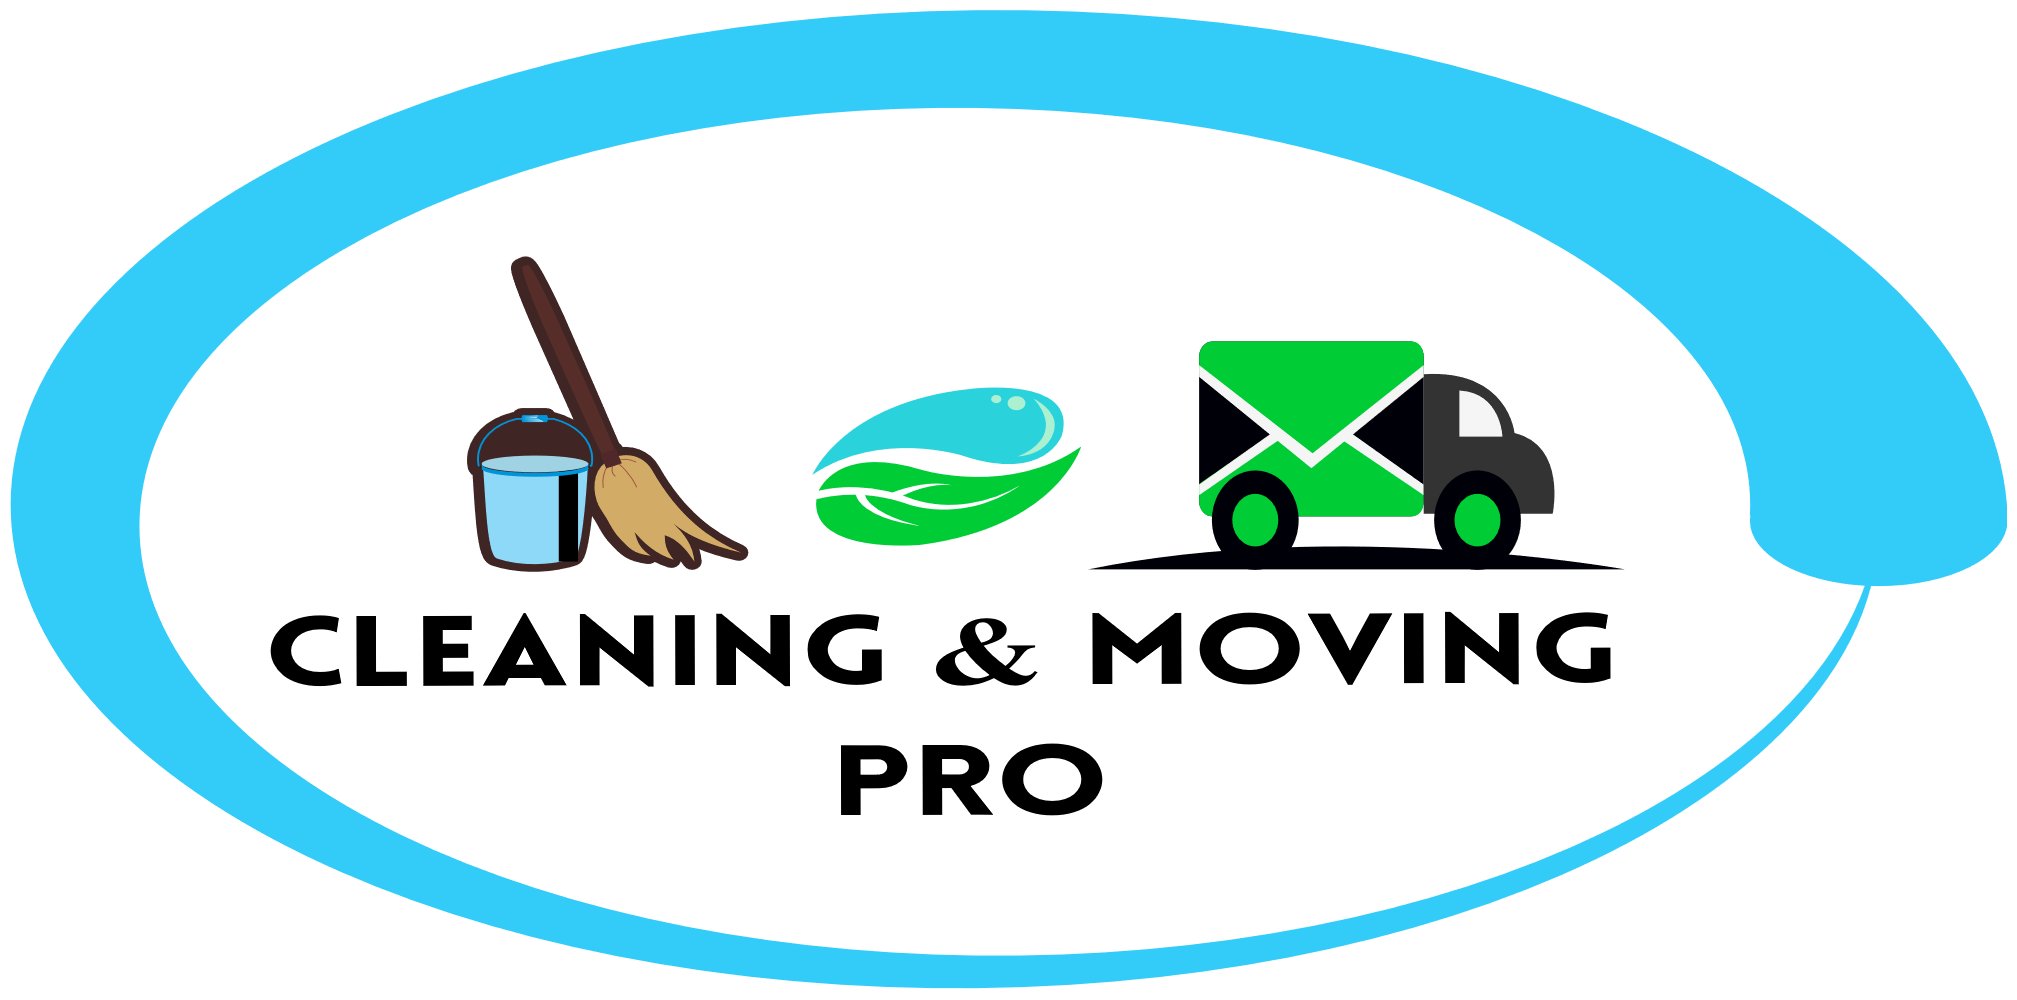 Your Trusted Cleaners: Galway, Dublin, Athlone, and Beyond.-CLEANING AND MOVING PRO